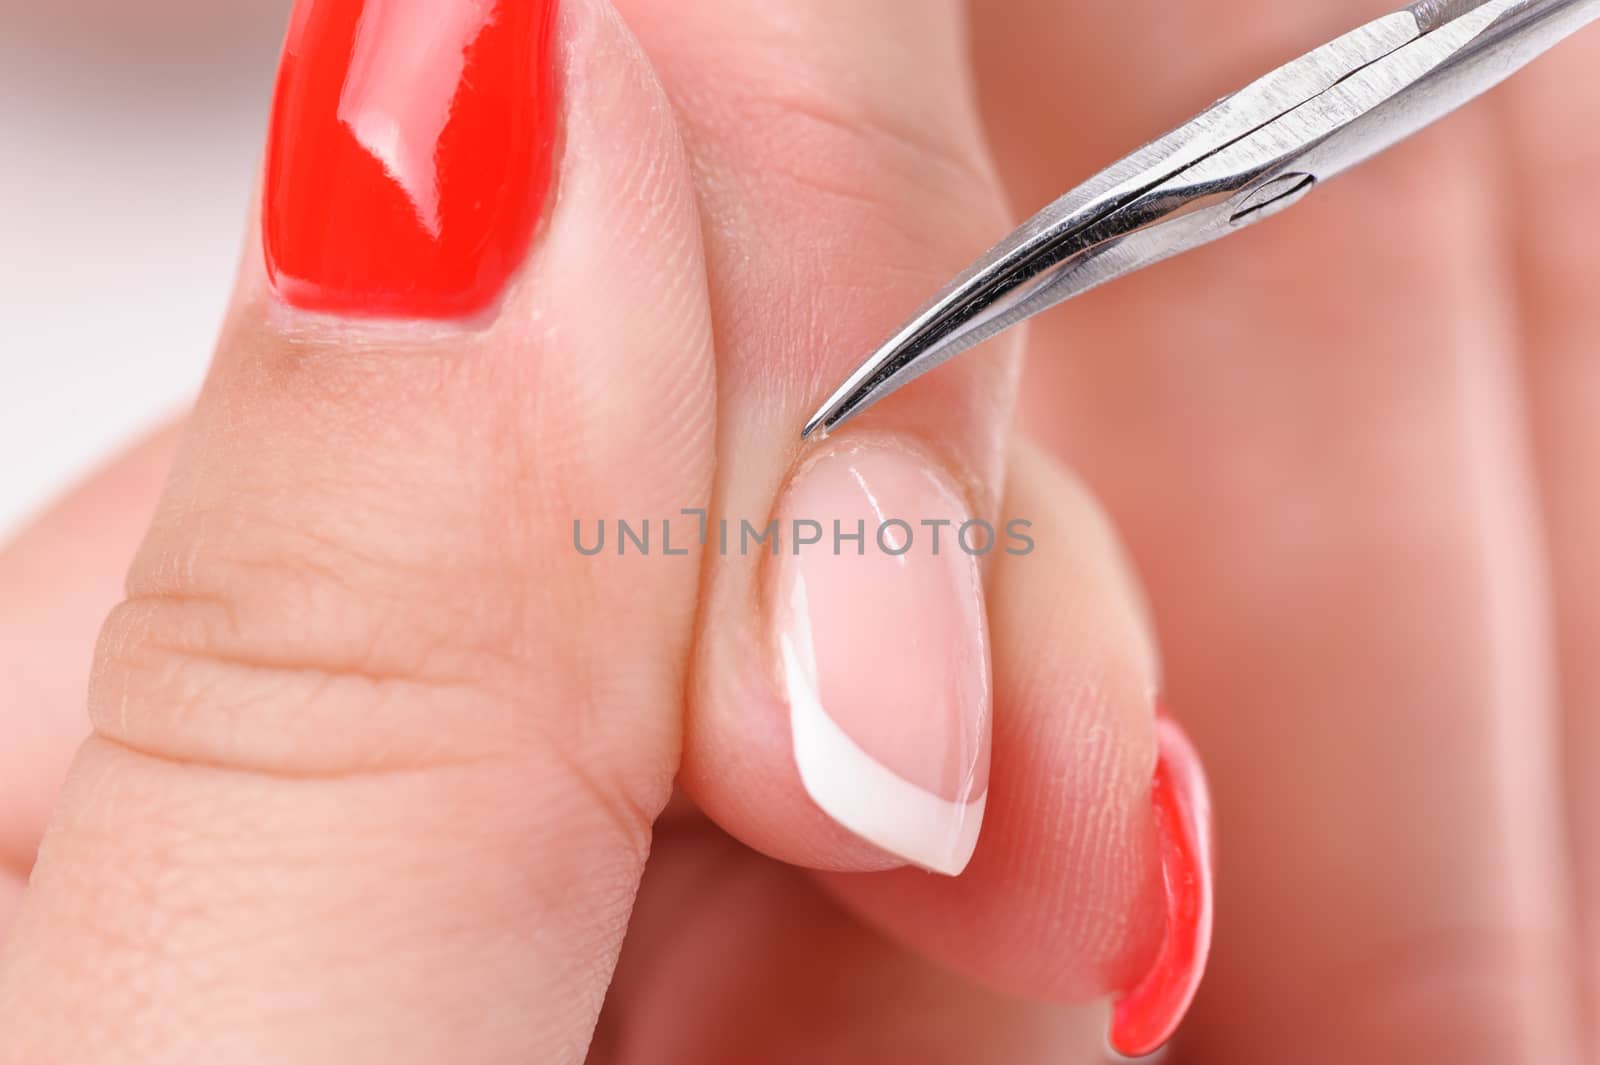 manicure applying - cutting the cuticle  by starush